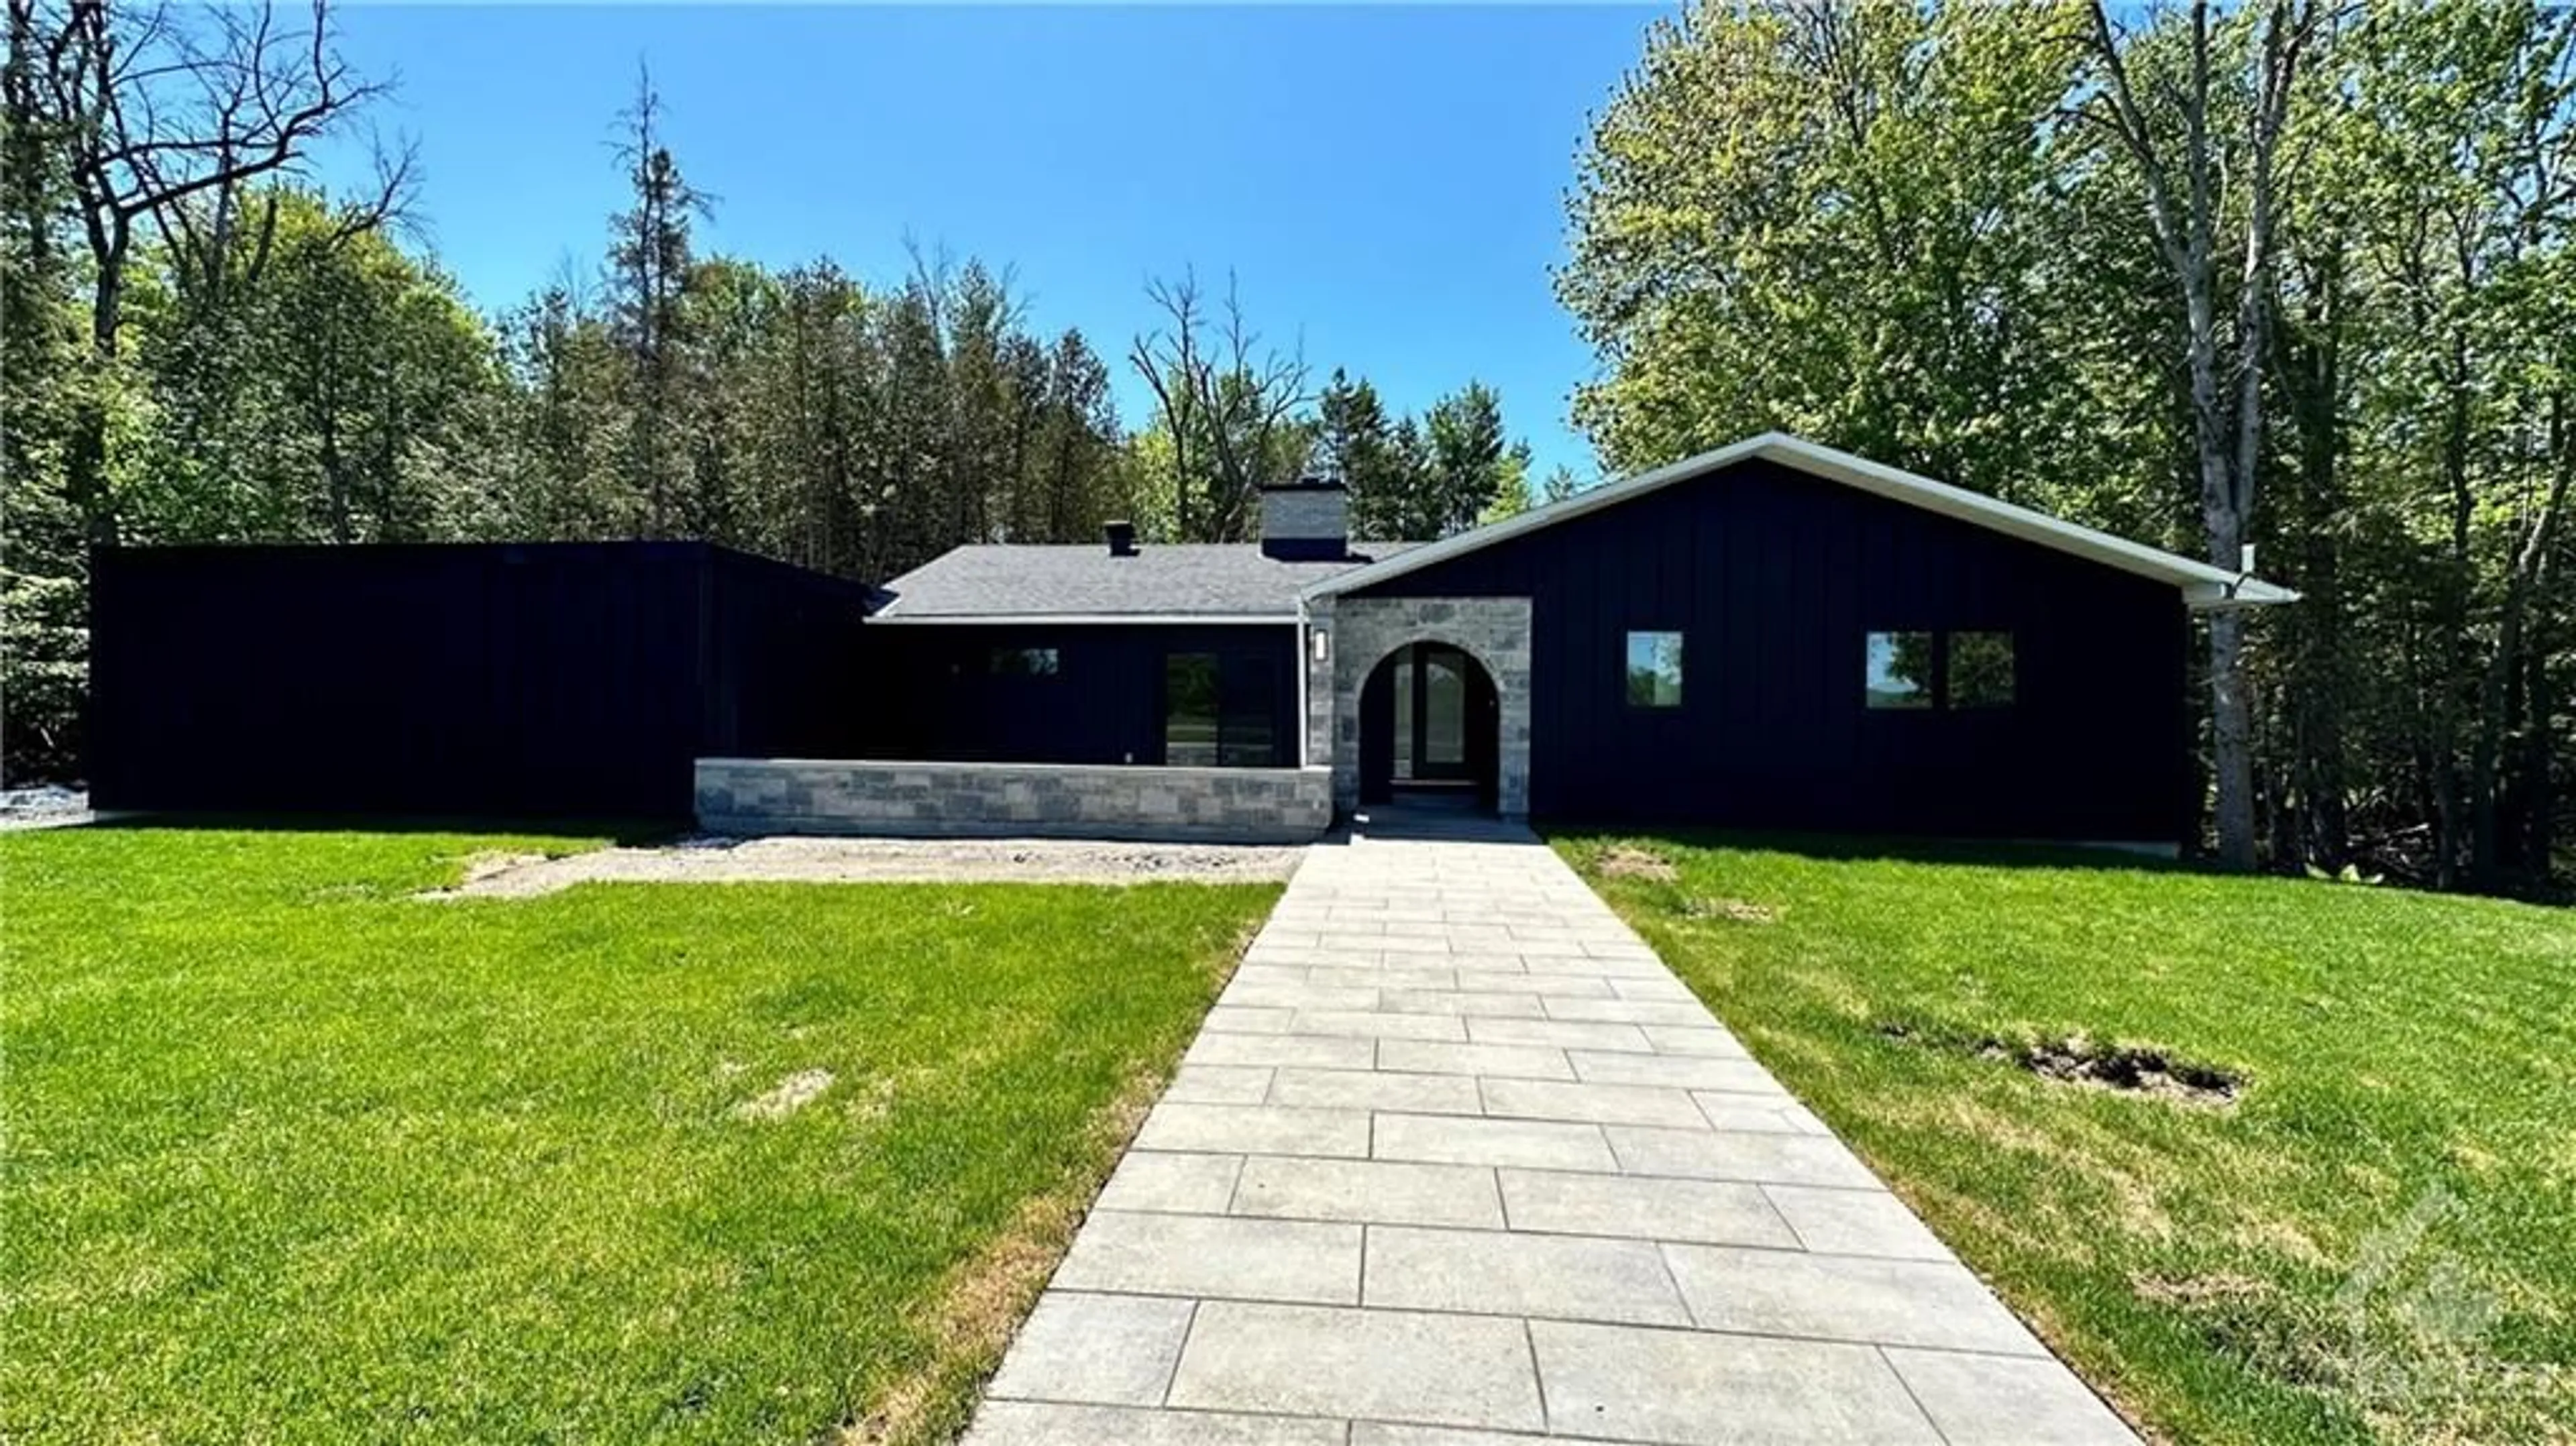 Frontside or backside of a home for 121 WAGON Dr, Dunrobin Ontario K0A 1T0